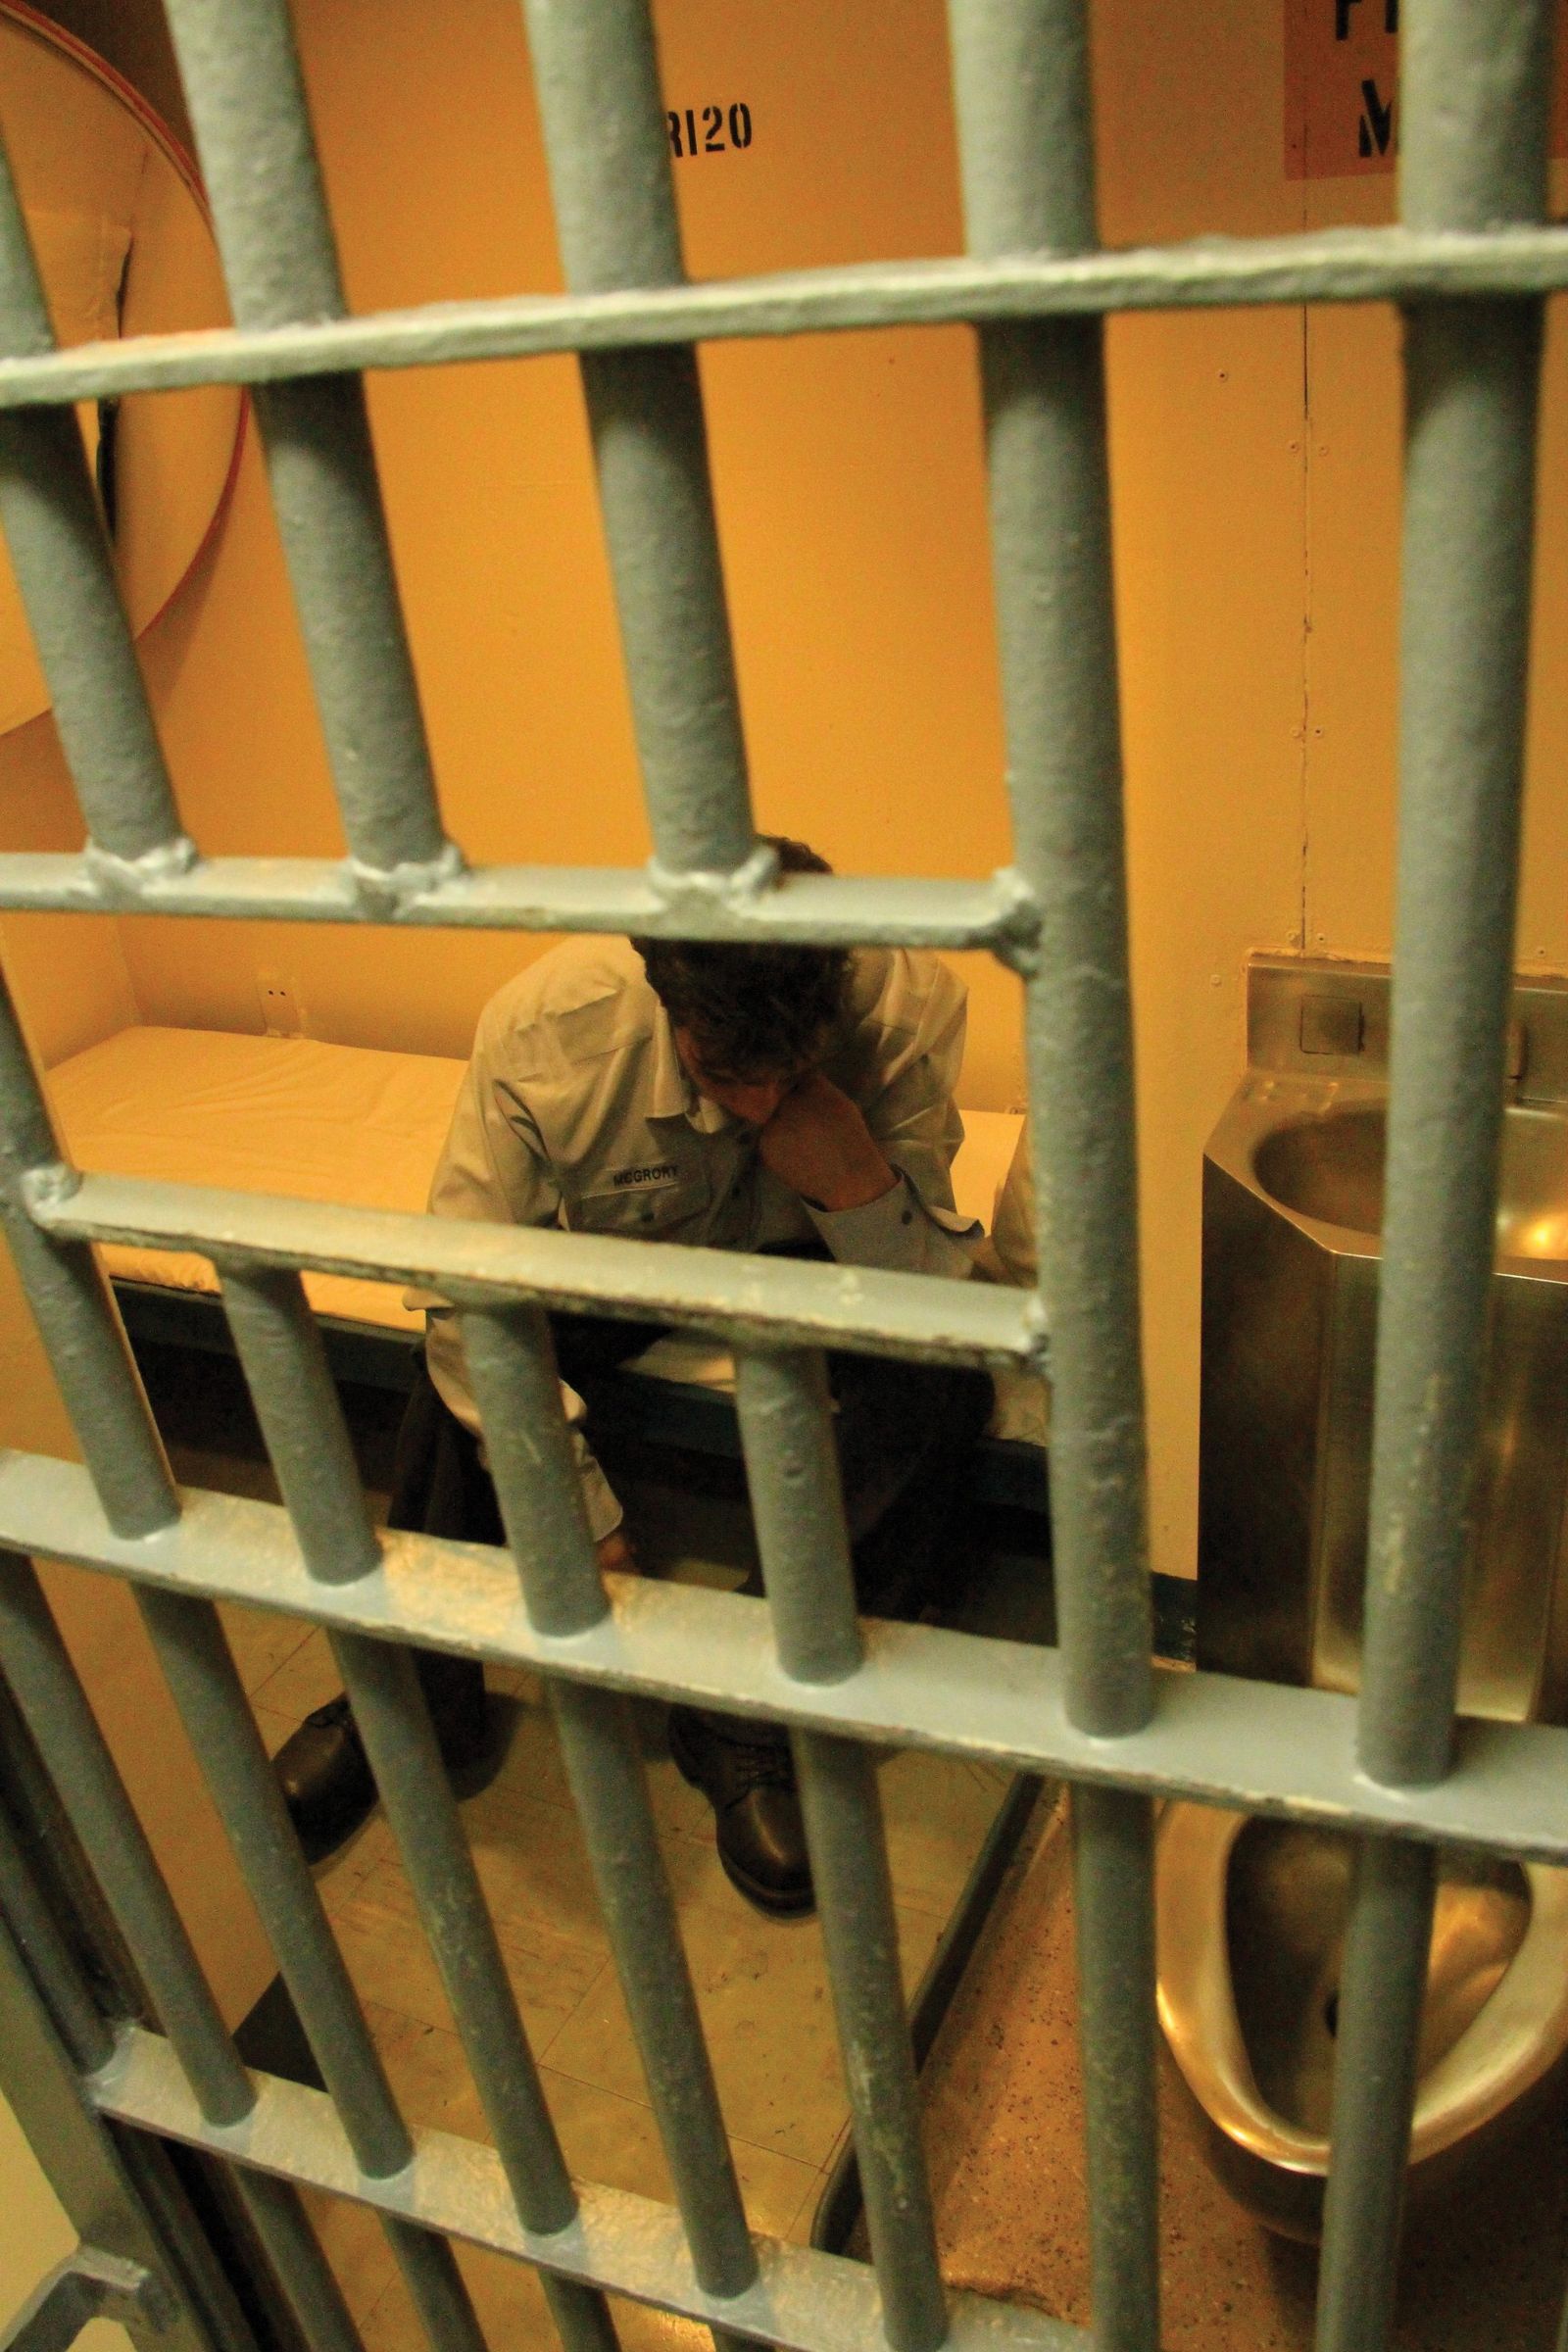 A man sitting in a prison cell looking discouraged.